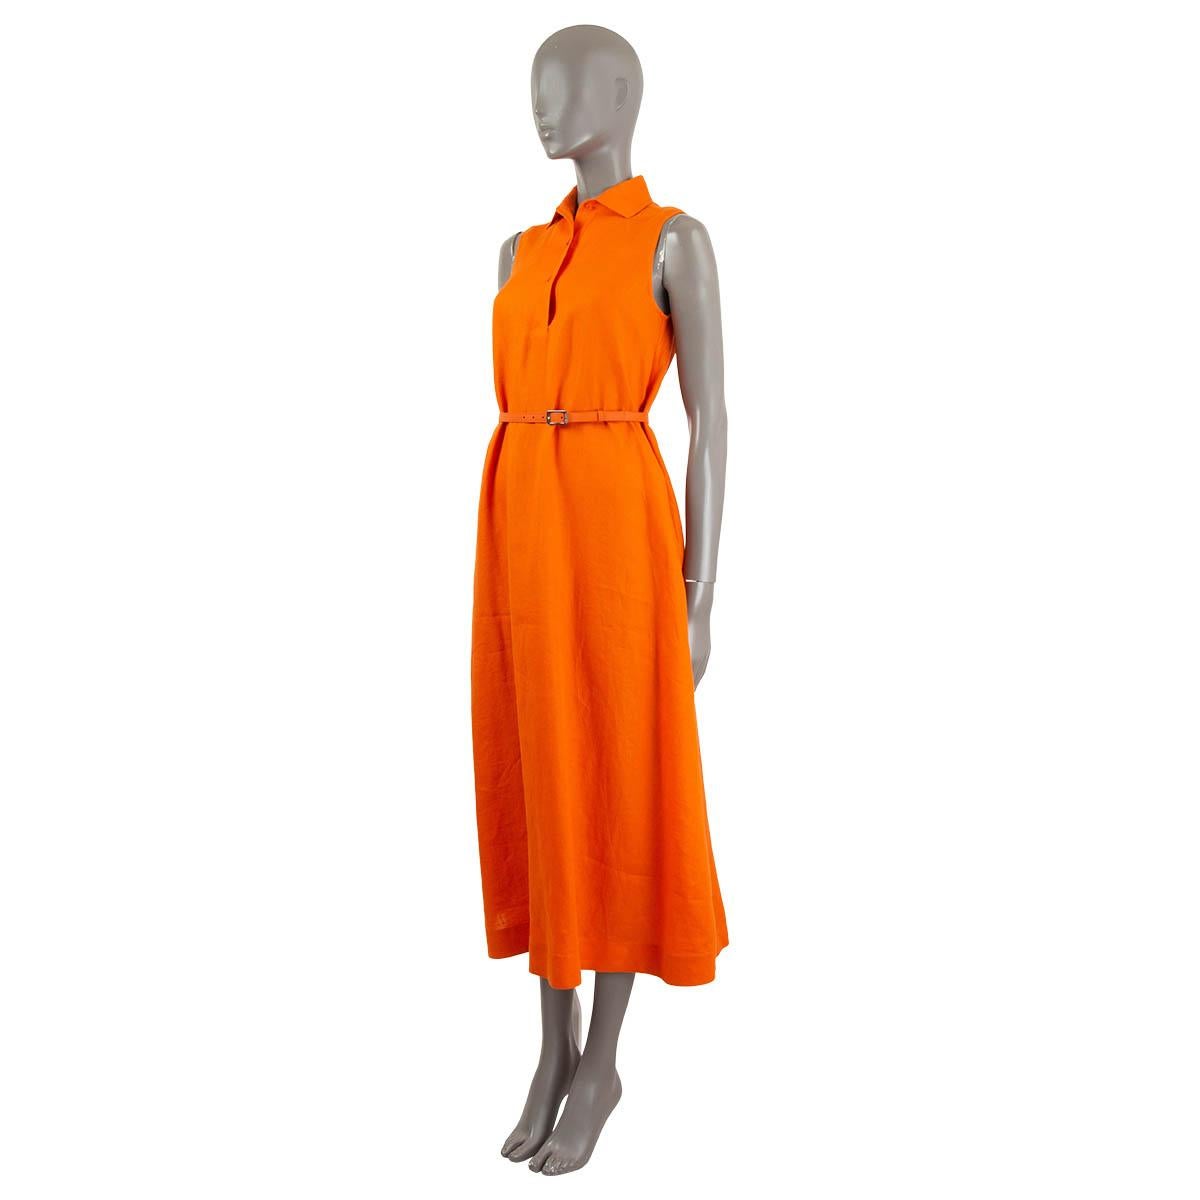 100% authentic Loro Piana Leyla belted sleeveless shirt dress in orange linen (100%). The fabric is treated with aloe vera for a wrinkle-resisting design you can pack with ease. It's cinched at the waist with a logo-engraved nappa leather belt. The